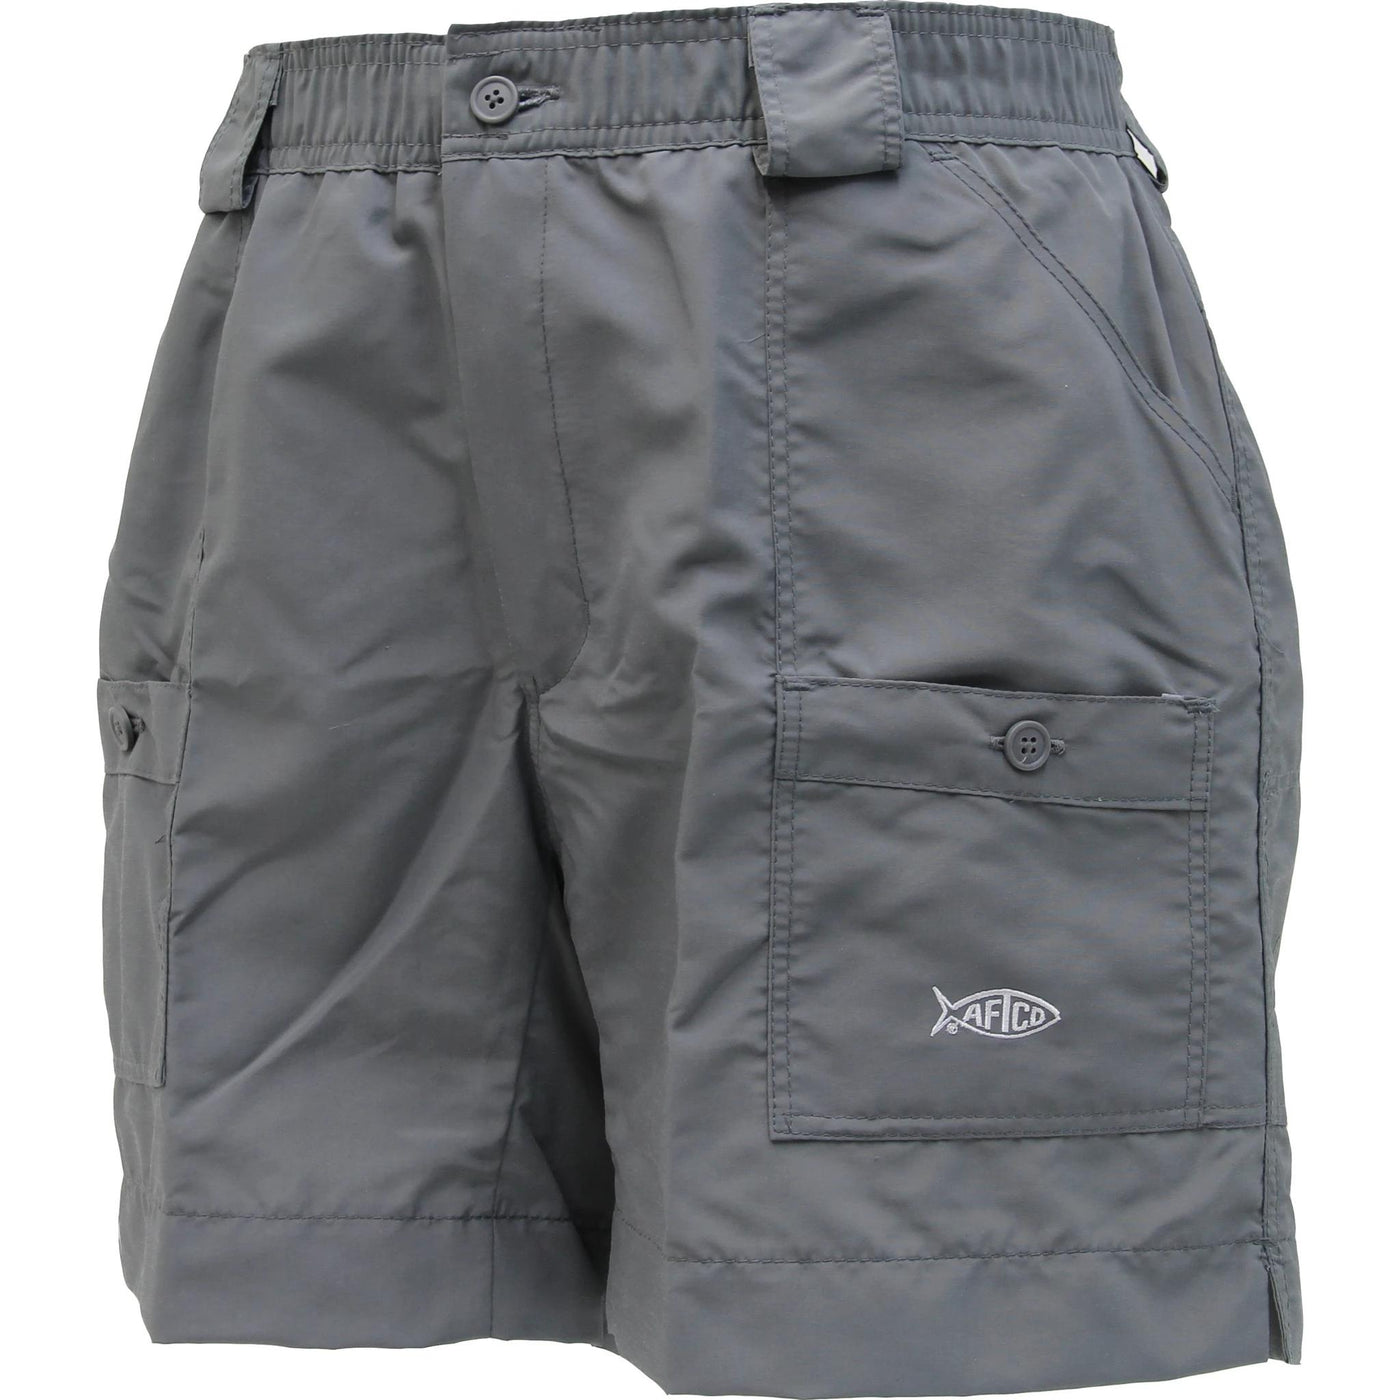 Aftco Original Fishing Shorts - Long-MENS CLOTHING-Charcoal-28-Kevin's Fine Outdoor Gear & Apparel